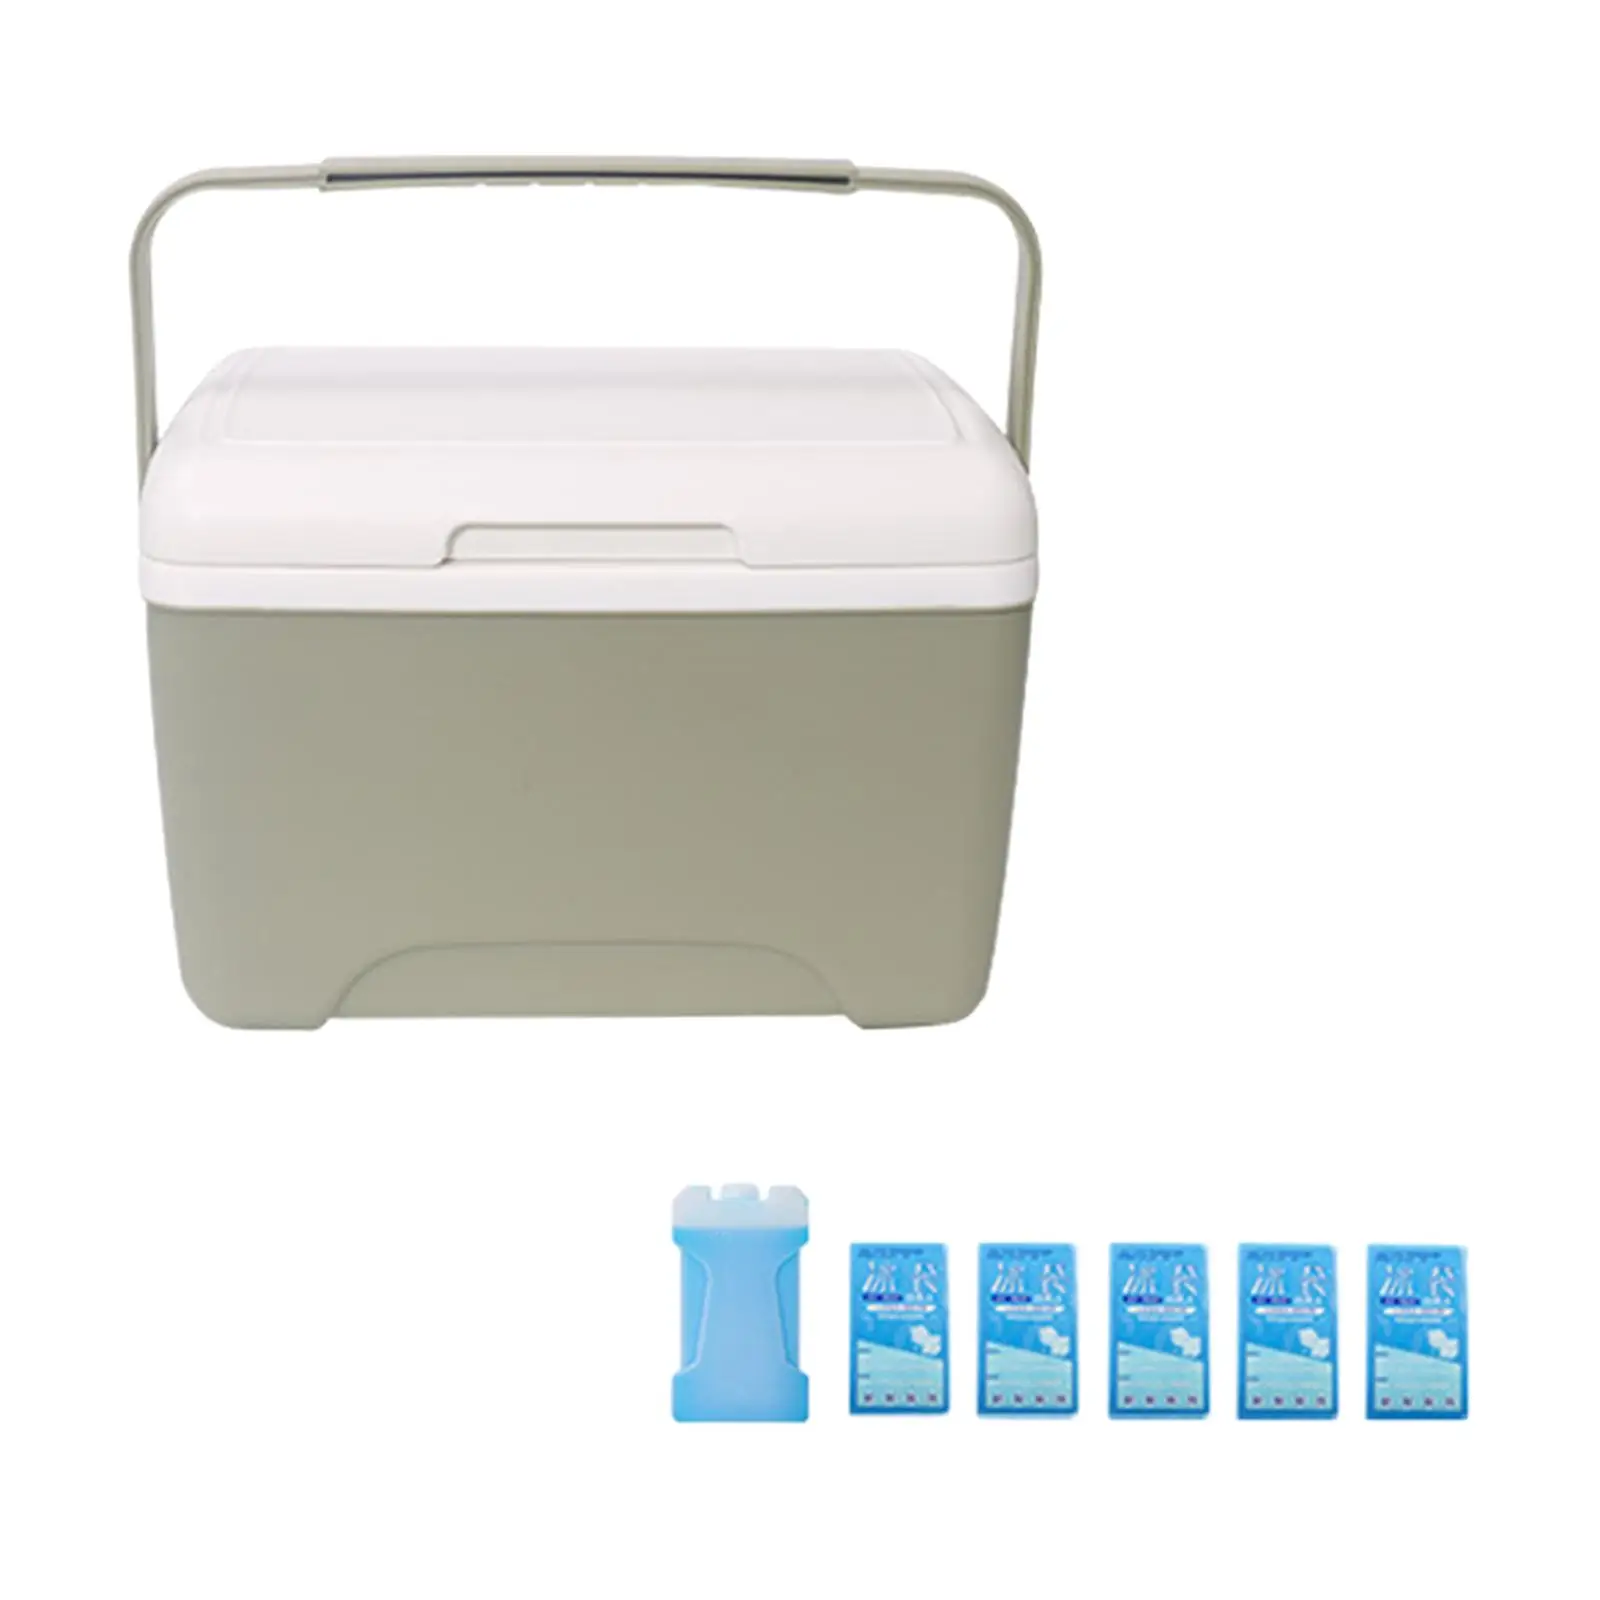 8L Camping Insulated Cooler Food Storage Box Ice Box Lightweight Cooler Bag Cool Box Insulated Thermal Cooler for Beach Party